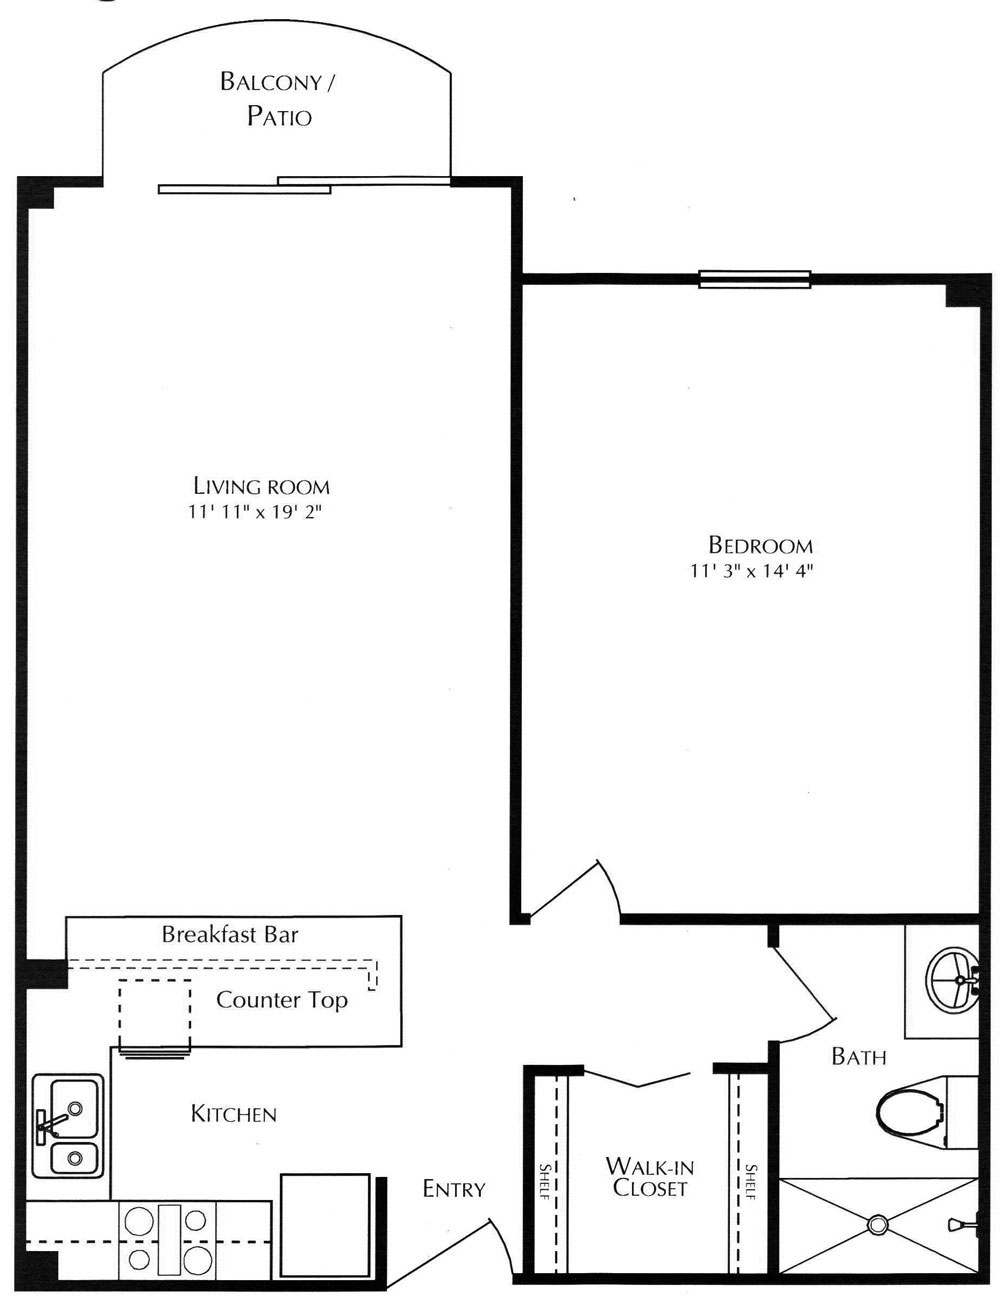 A one bedroom cartright floor plan at Kingswood Senior Living Located in Kansas City, MO.